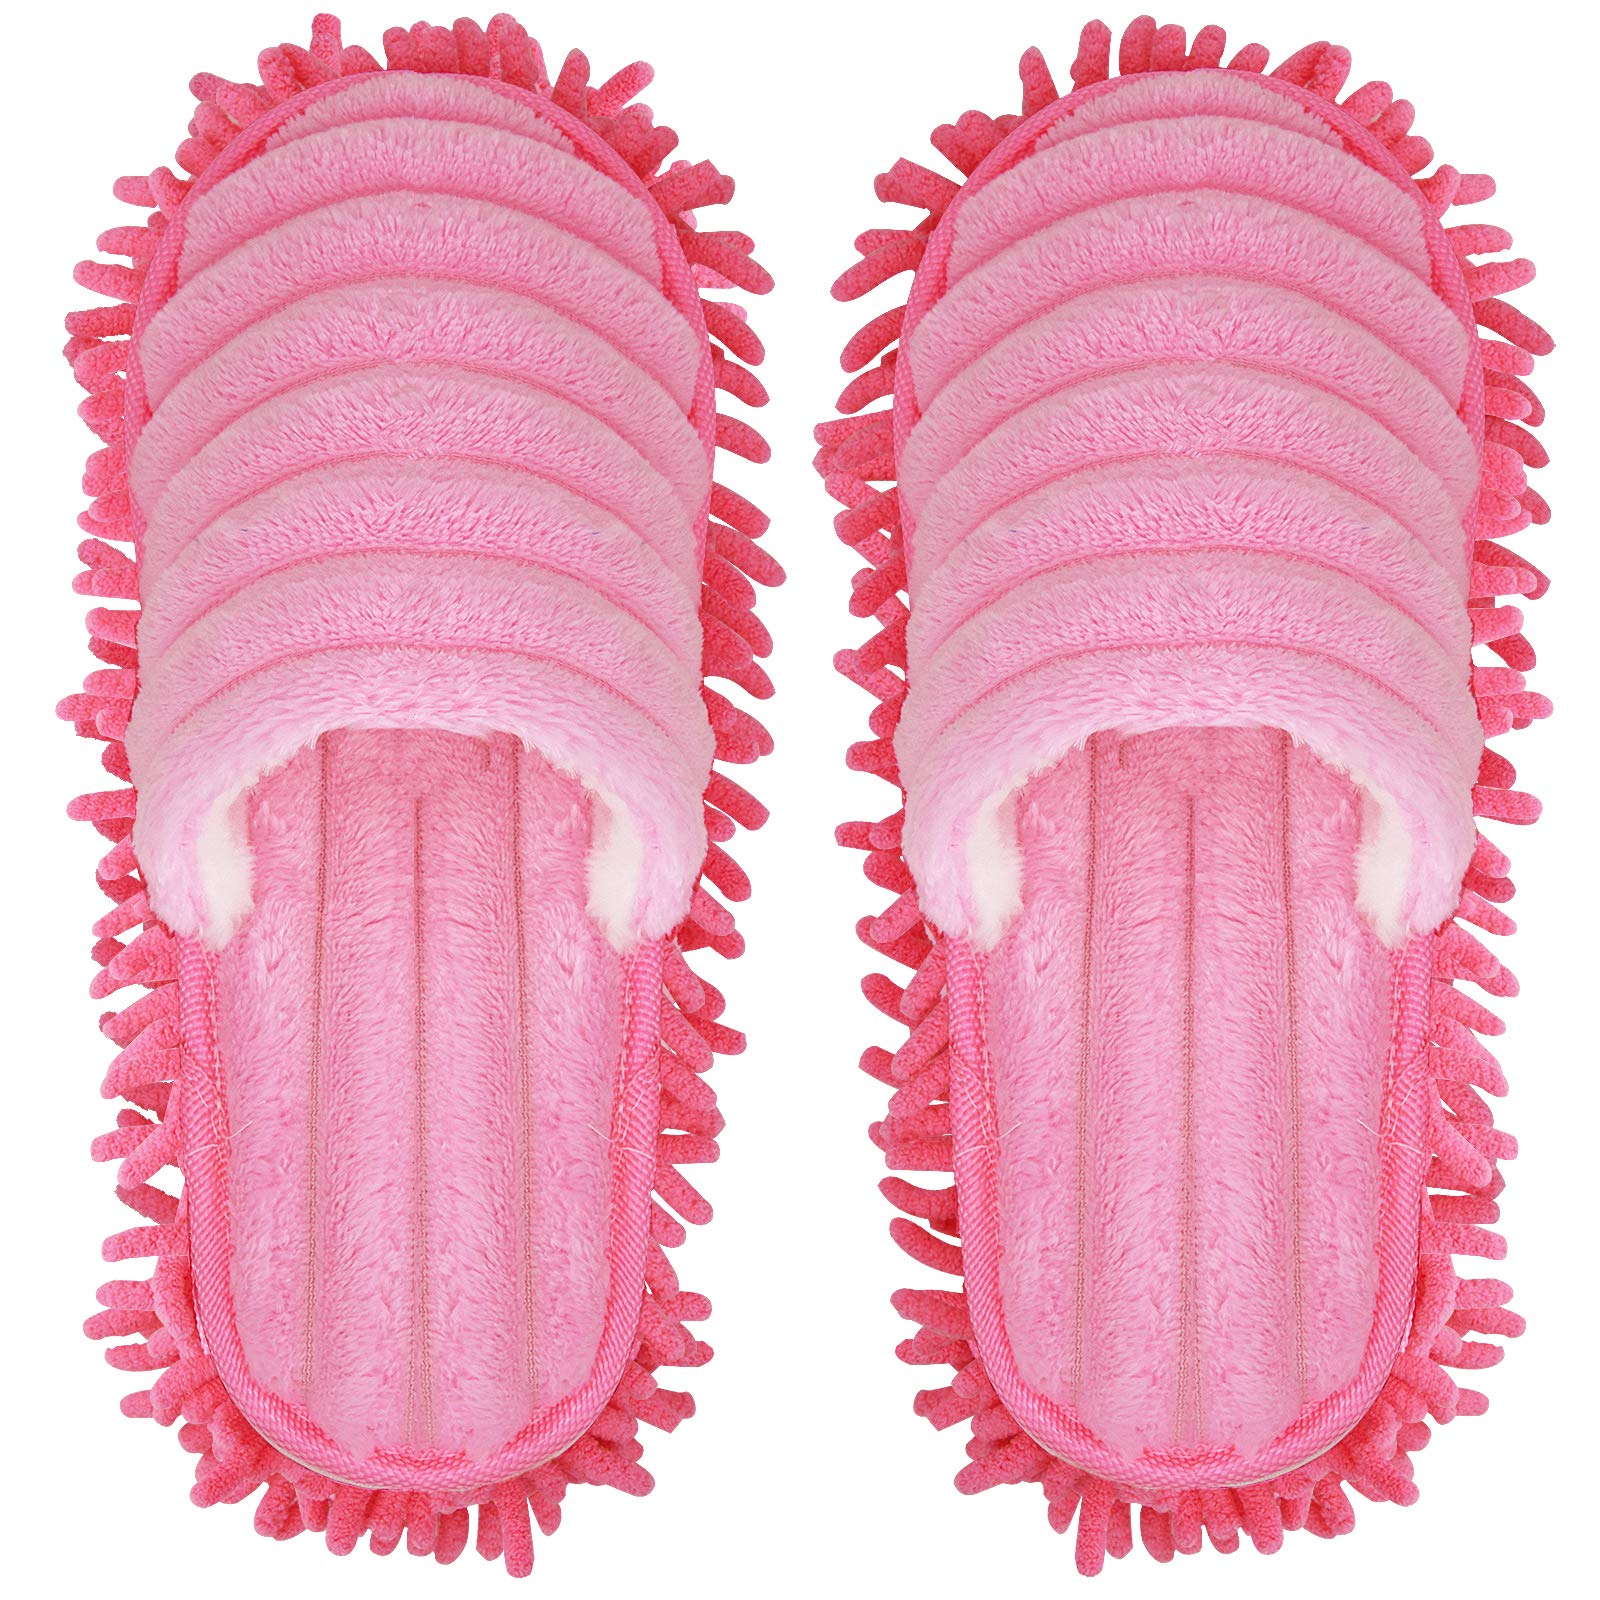 Dust Mop Slippers -  Canada